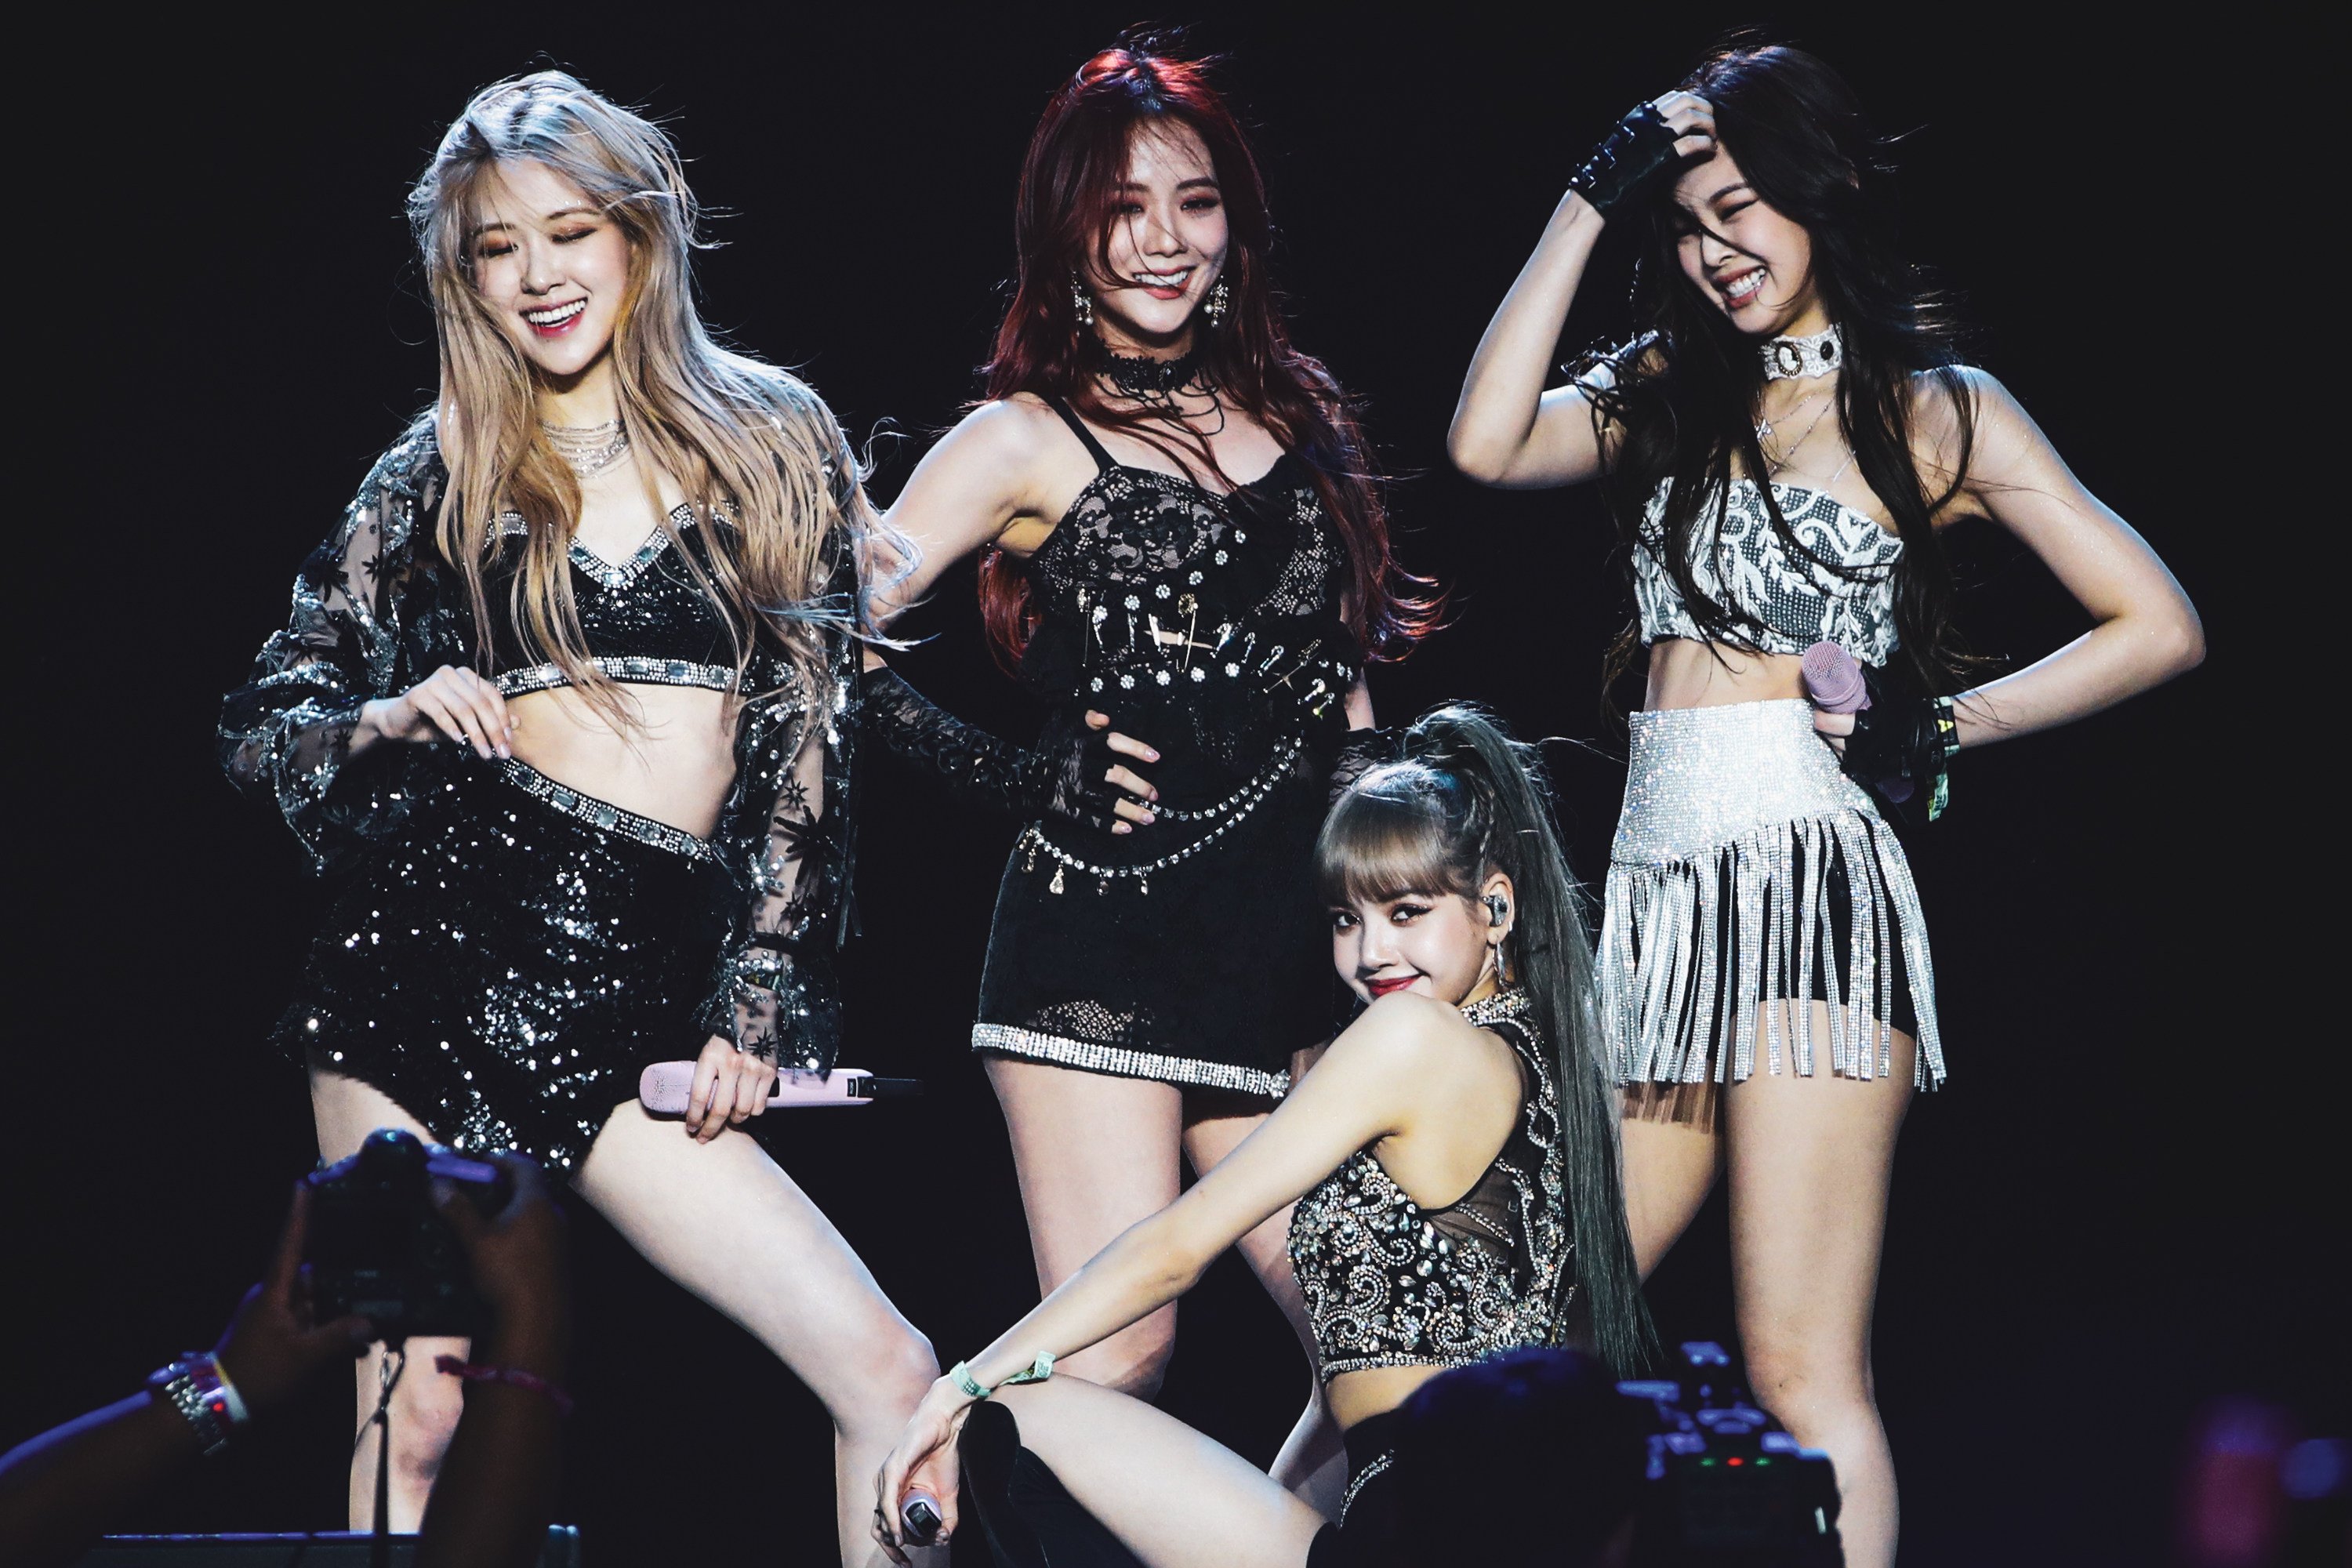 Blackpink perform during an event in California in April 2019. Photo: Getty Images